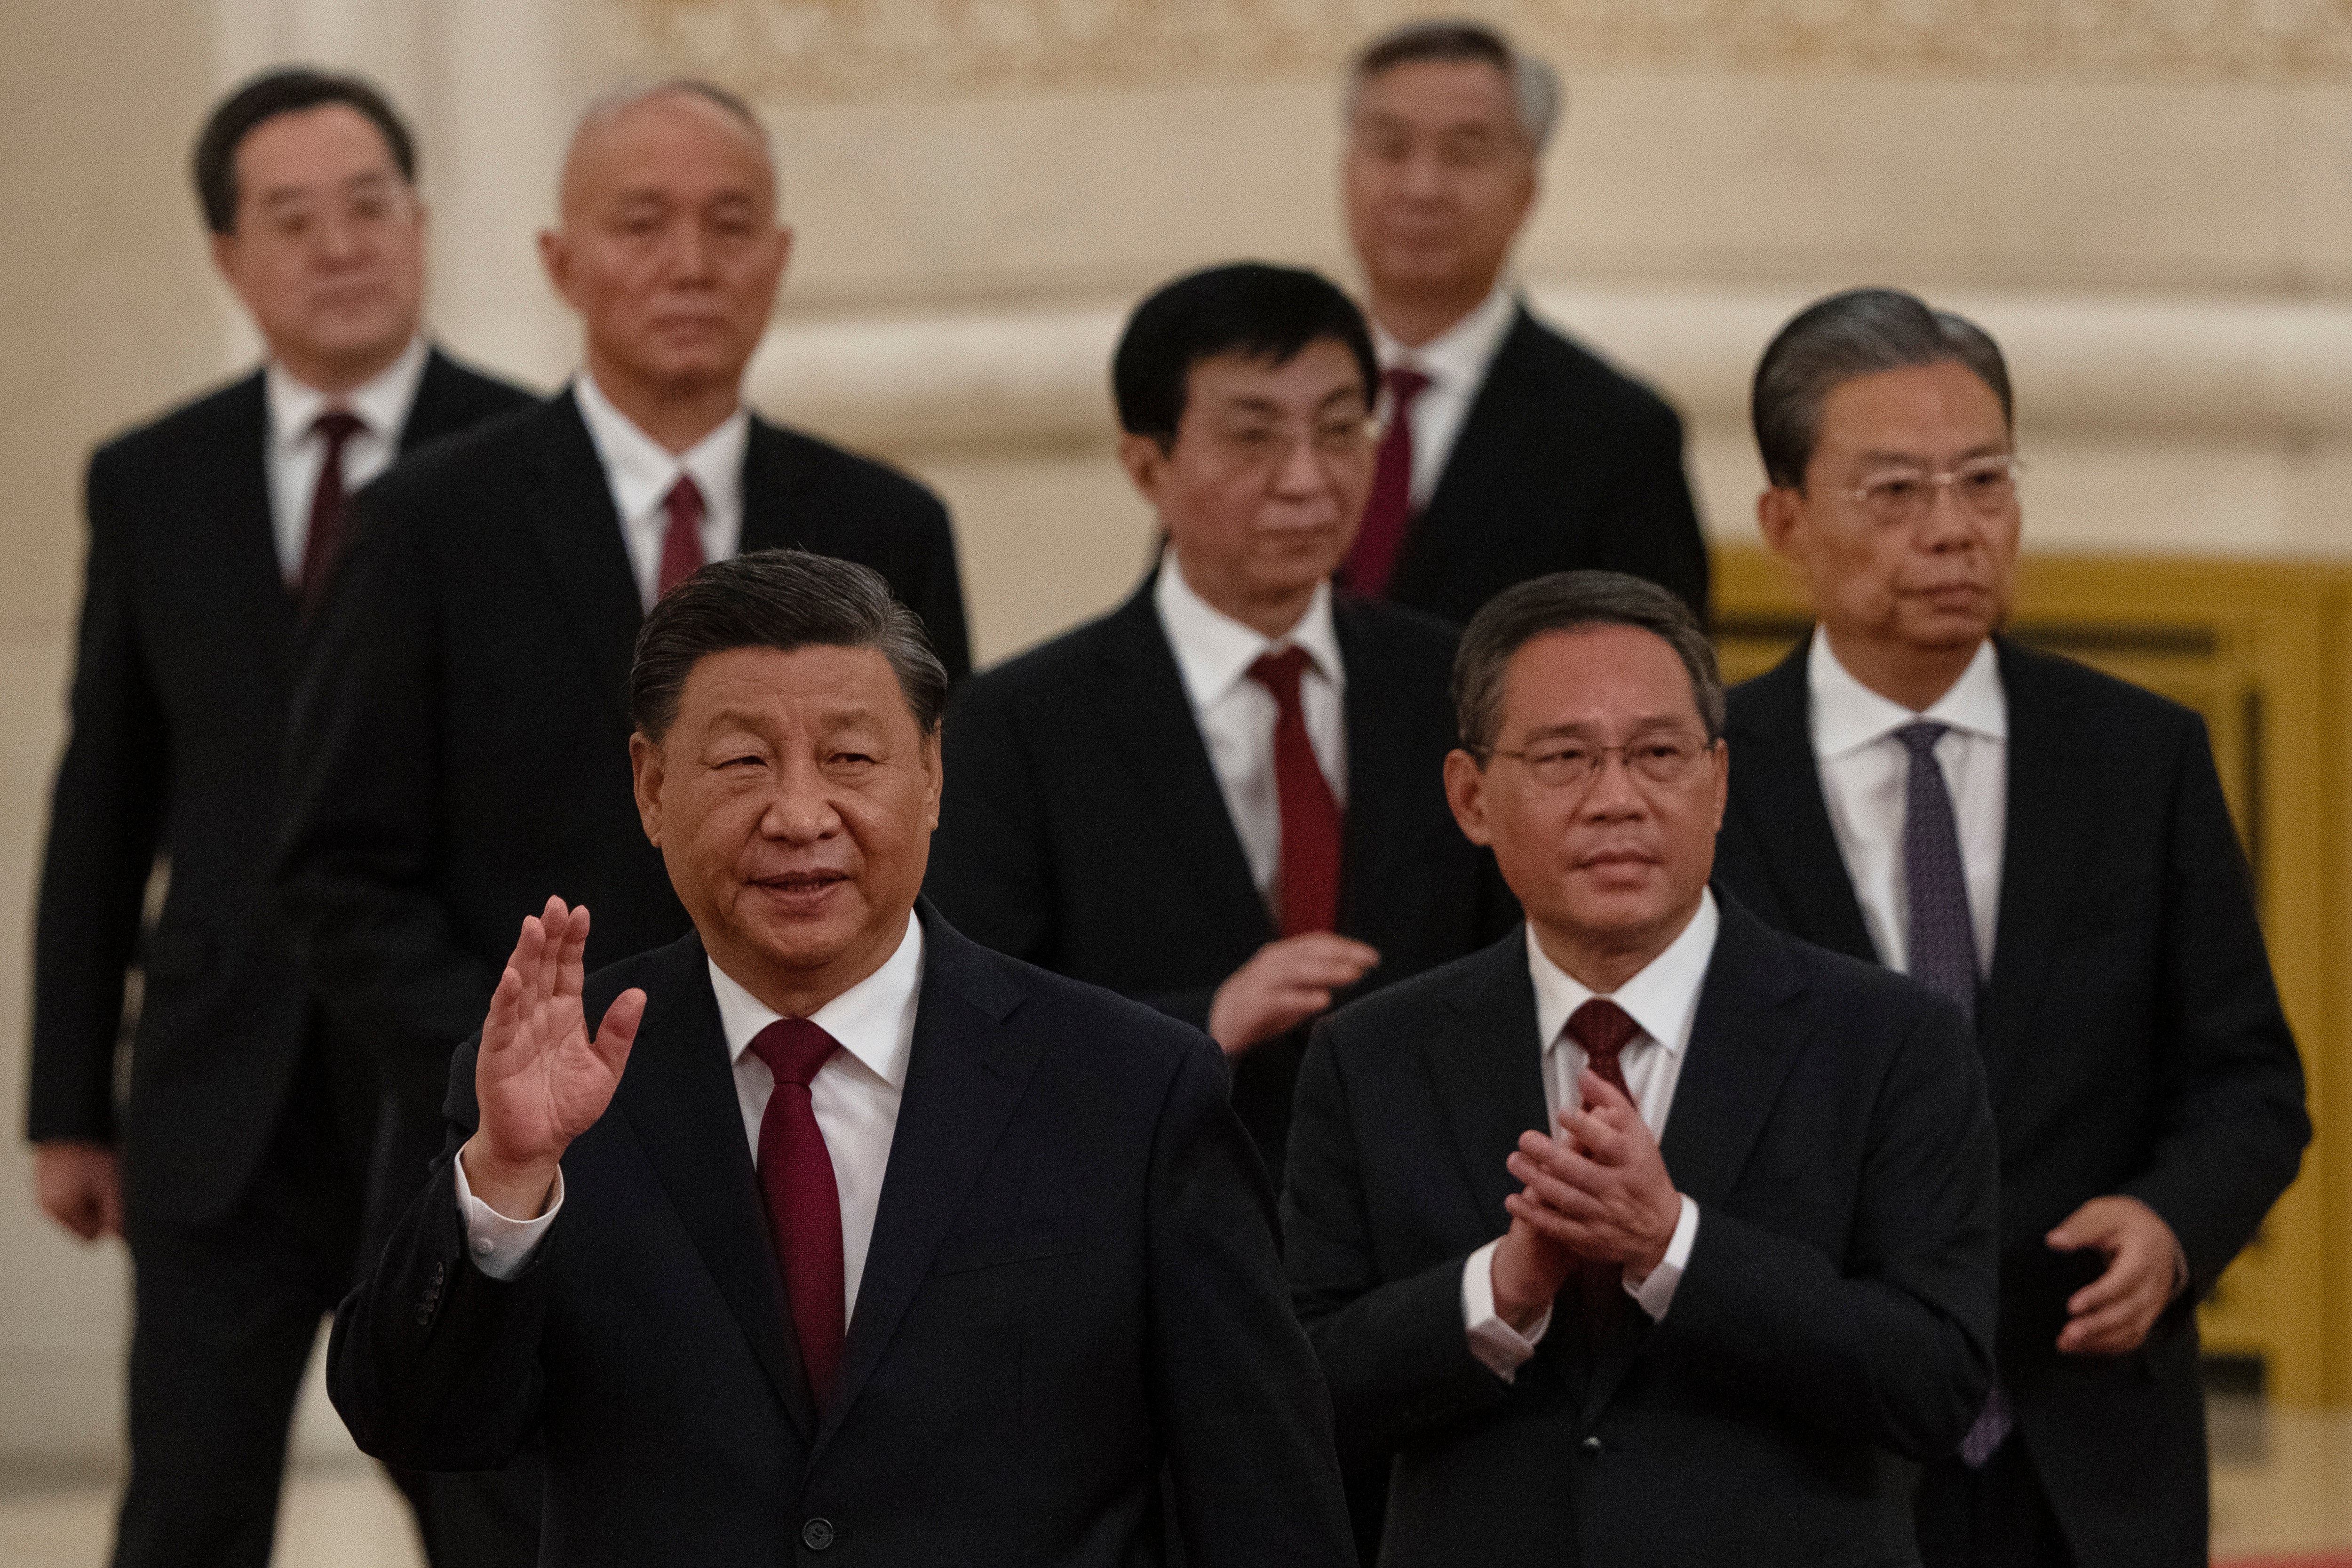 New members of the Politburo Standing Committee (front to back), including President Xi Jinping, Li Qiang, Zhao Leji, Wang Huning, Cai Qi, Ding Xuexiang, and Li Xi arrive at the Great Hall of the People in Beijing on 23 October 2022